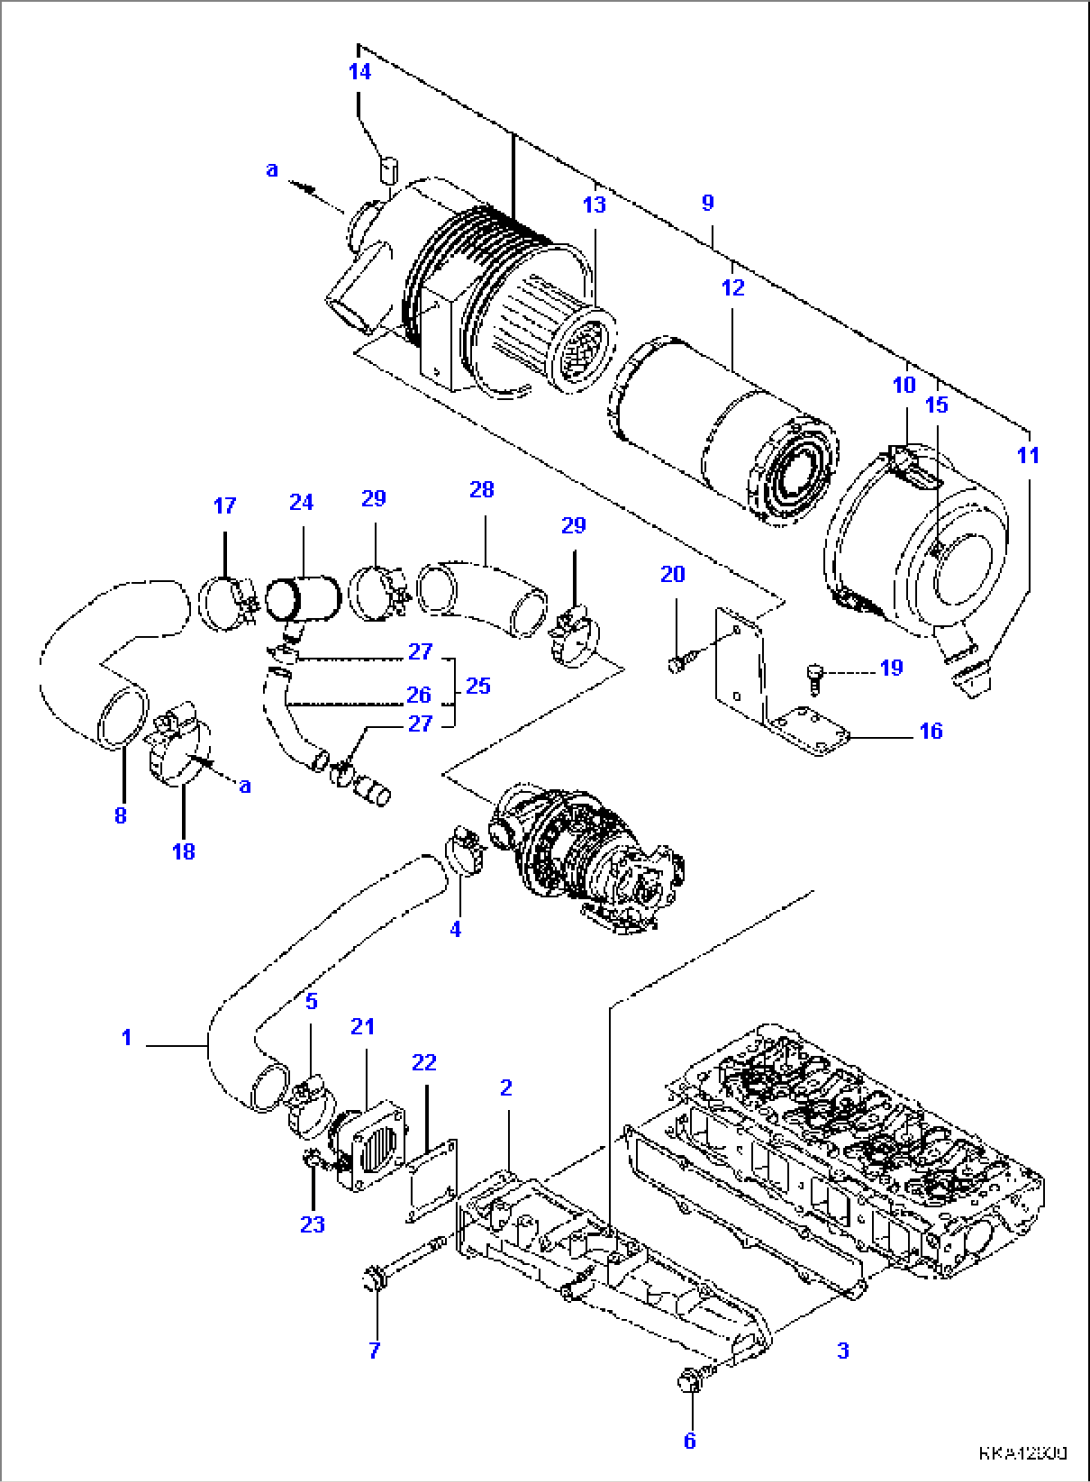 SUCTION MANIFOLD AND AIR CLEANER